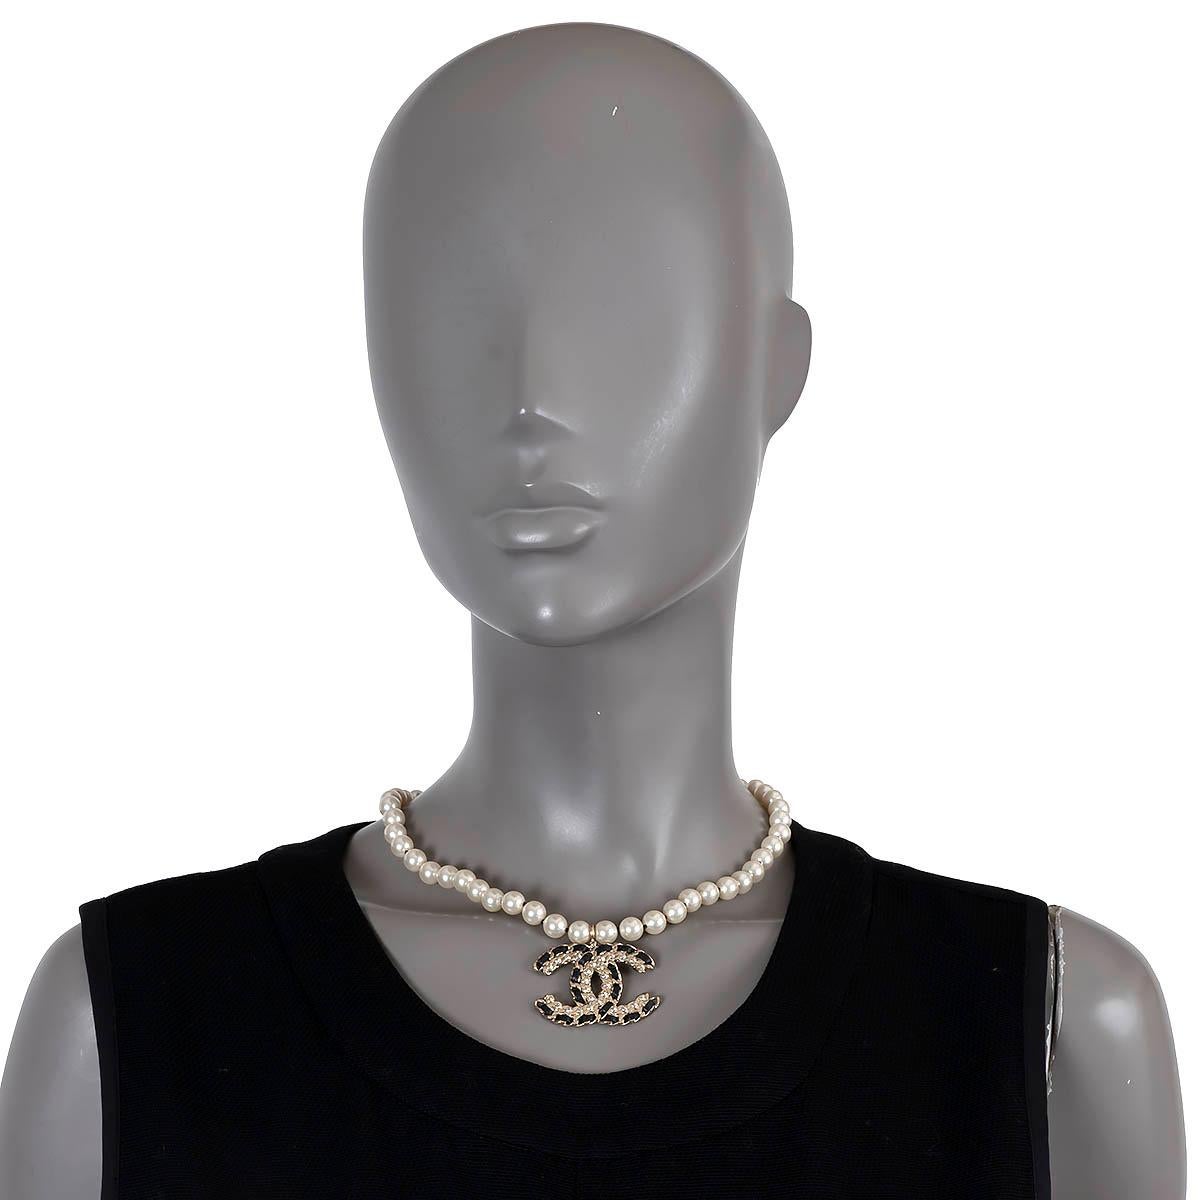 100% authentic Chanel short necklace in mother-of-pearl white faux pearls with light gold-tone metal, crystals and black leather CC pendant. Claw closure with adjustable chain. Has been worn and is in excellent condition. Comes with dust bag. 

2020